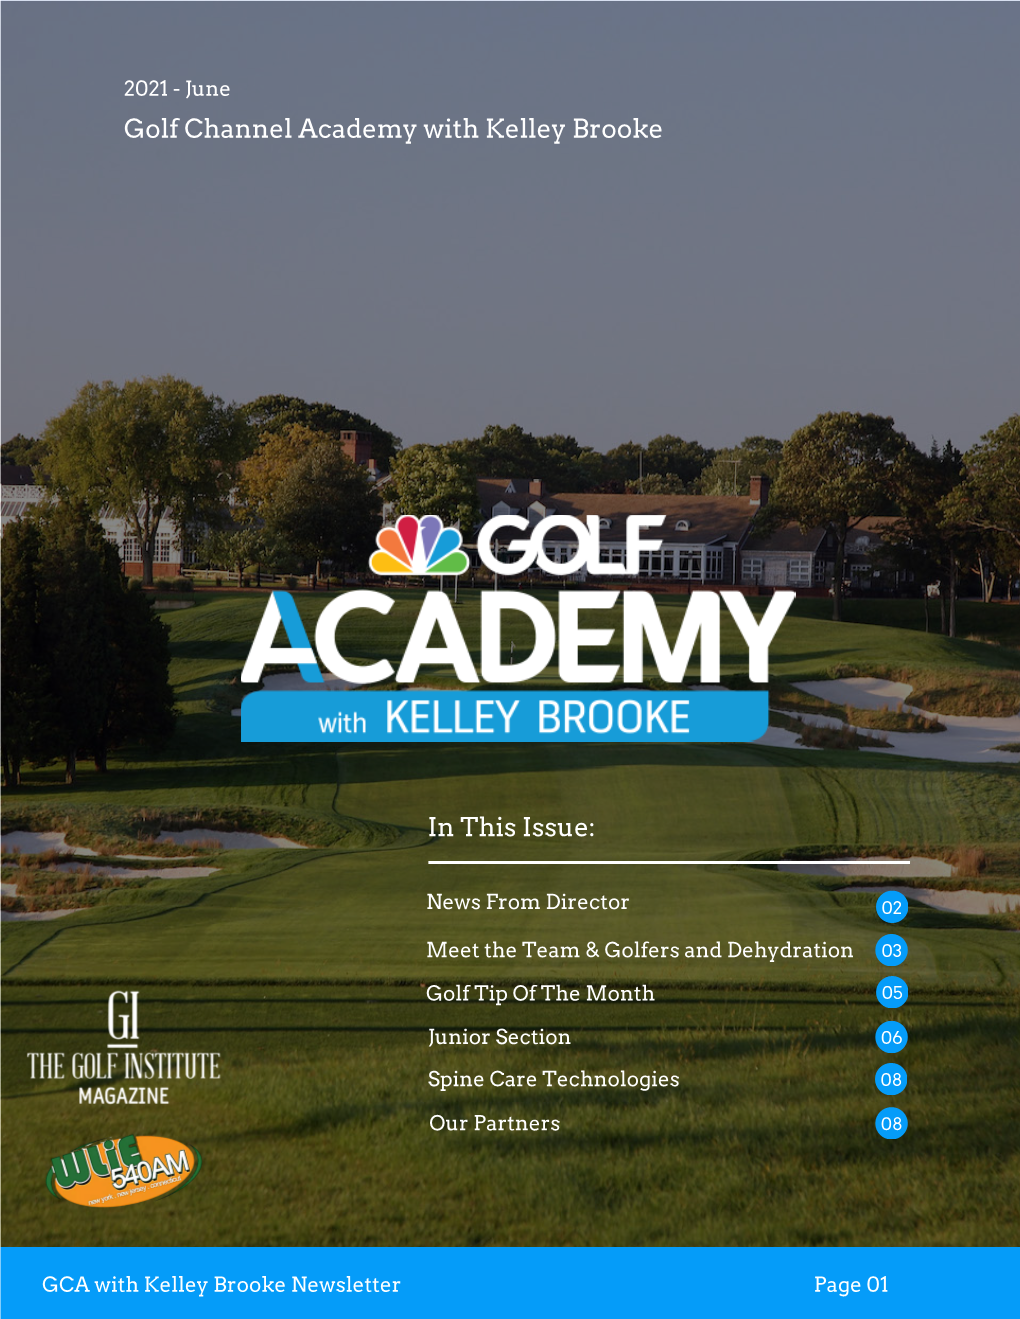 Golf Channel Academy with Kelley Brooke in This Issue